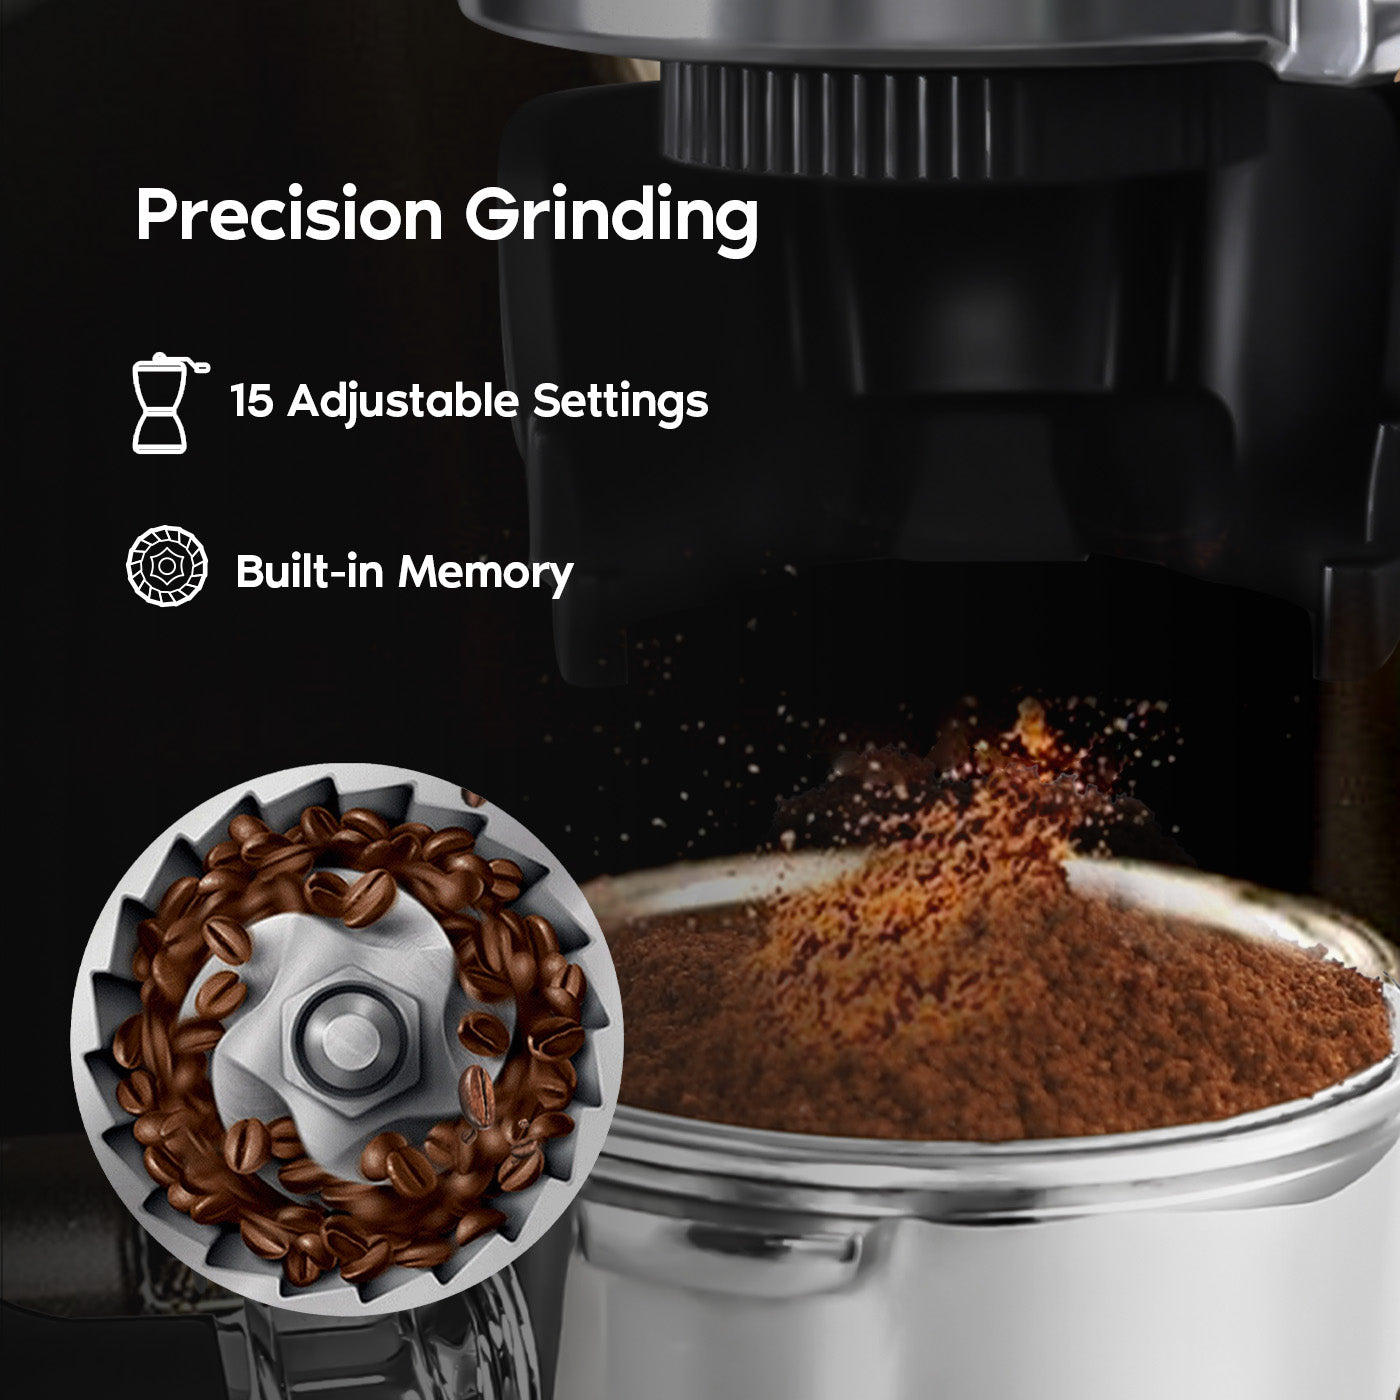 Espresso Machines With A Built-In Grinder. Are They Worth It